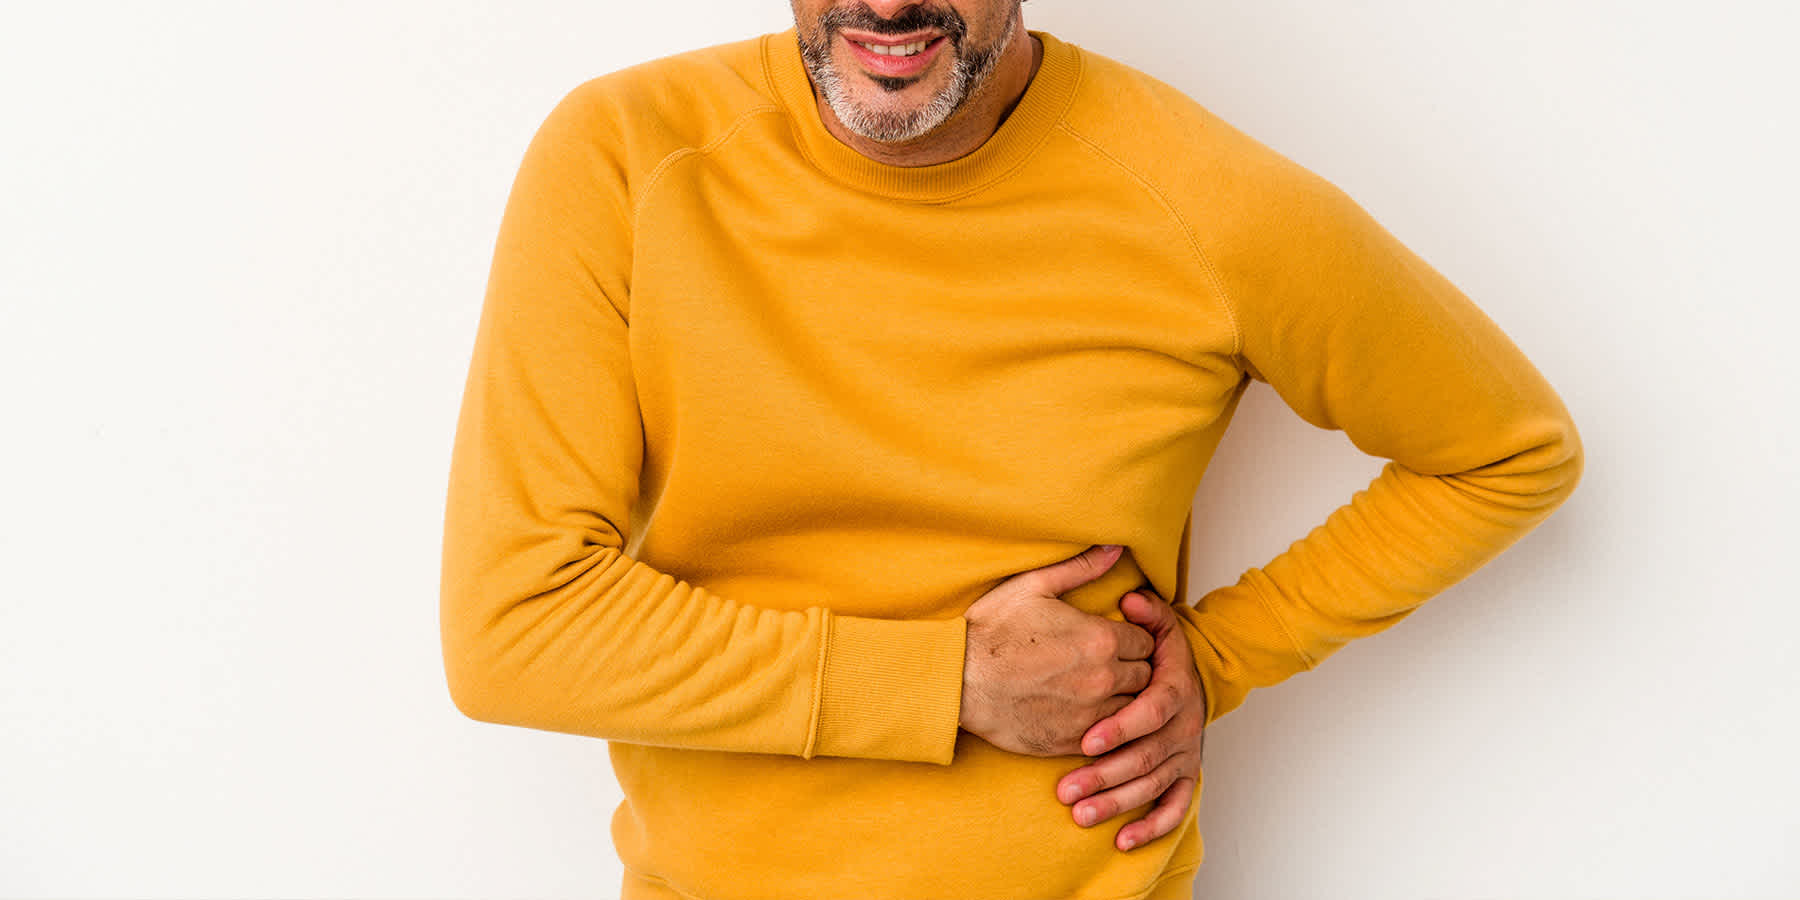 Hemorrhoids vs. colon cancer: what are the differences?